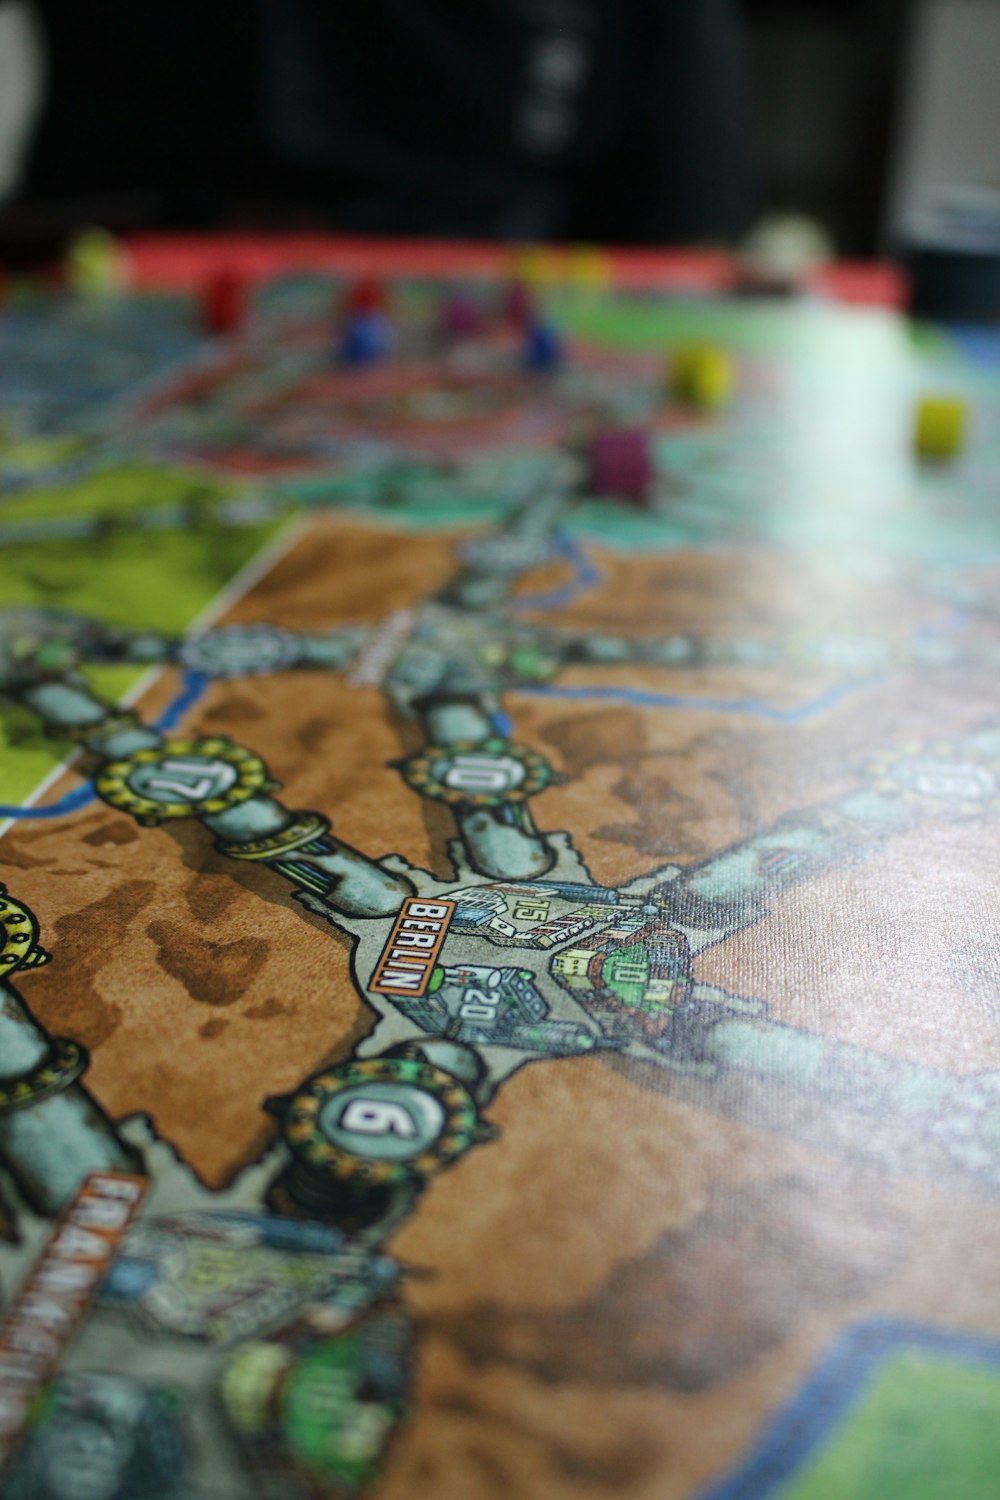 a close up view of a board game